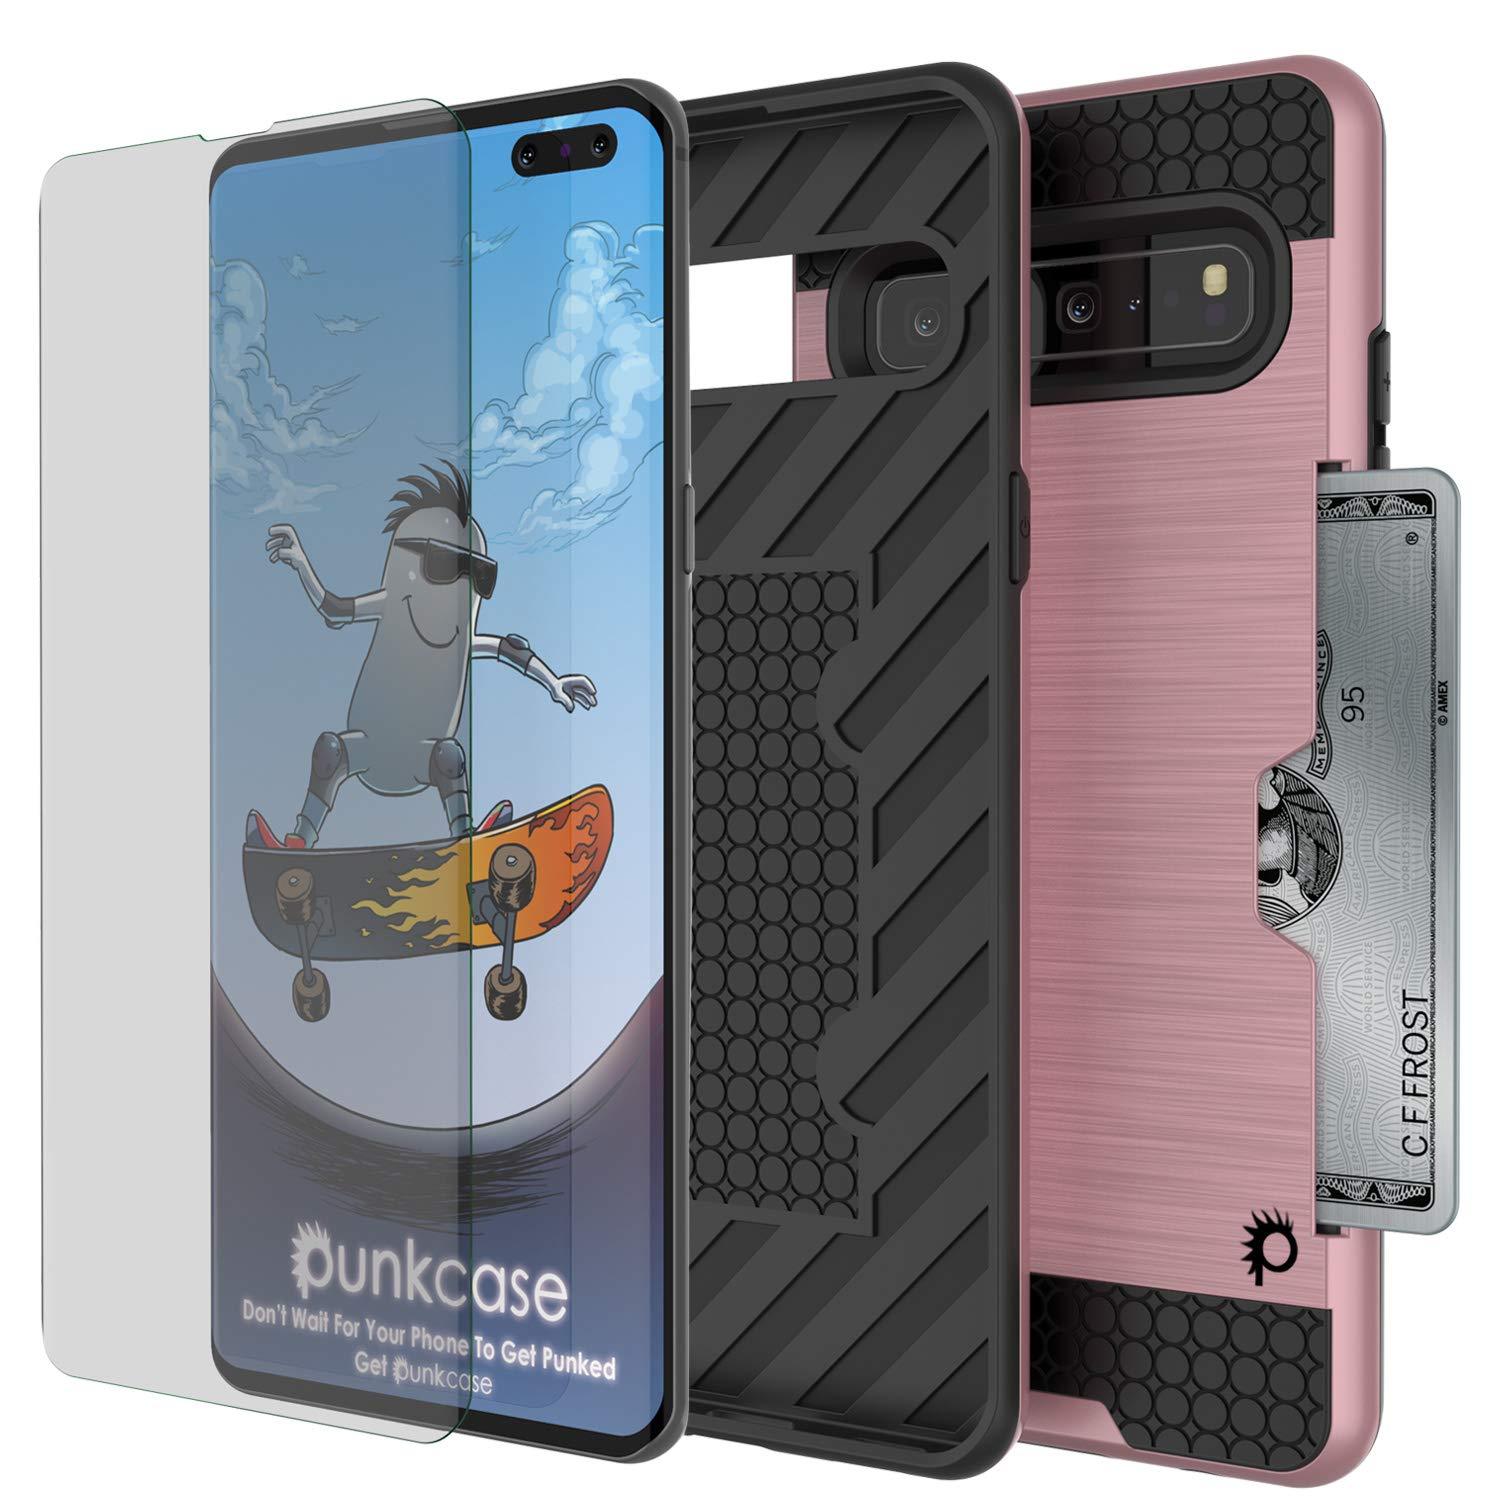 Galaxy S10 5G  Case, PUNKcase [SLOT Series] [Slim Fit] Dual-Layer Armor Cover w/Integrated Anti-Shock System, Credit Card Slot [Rose Gold]